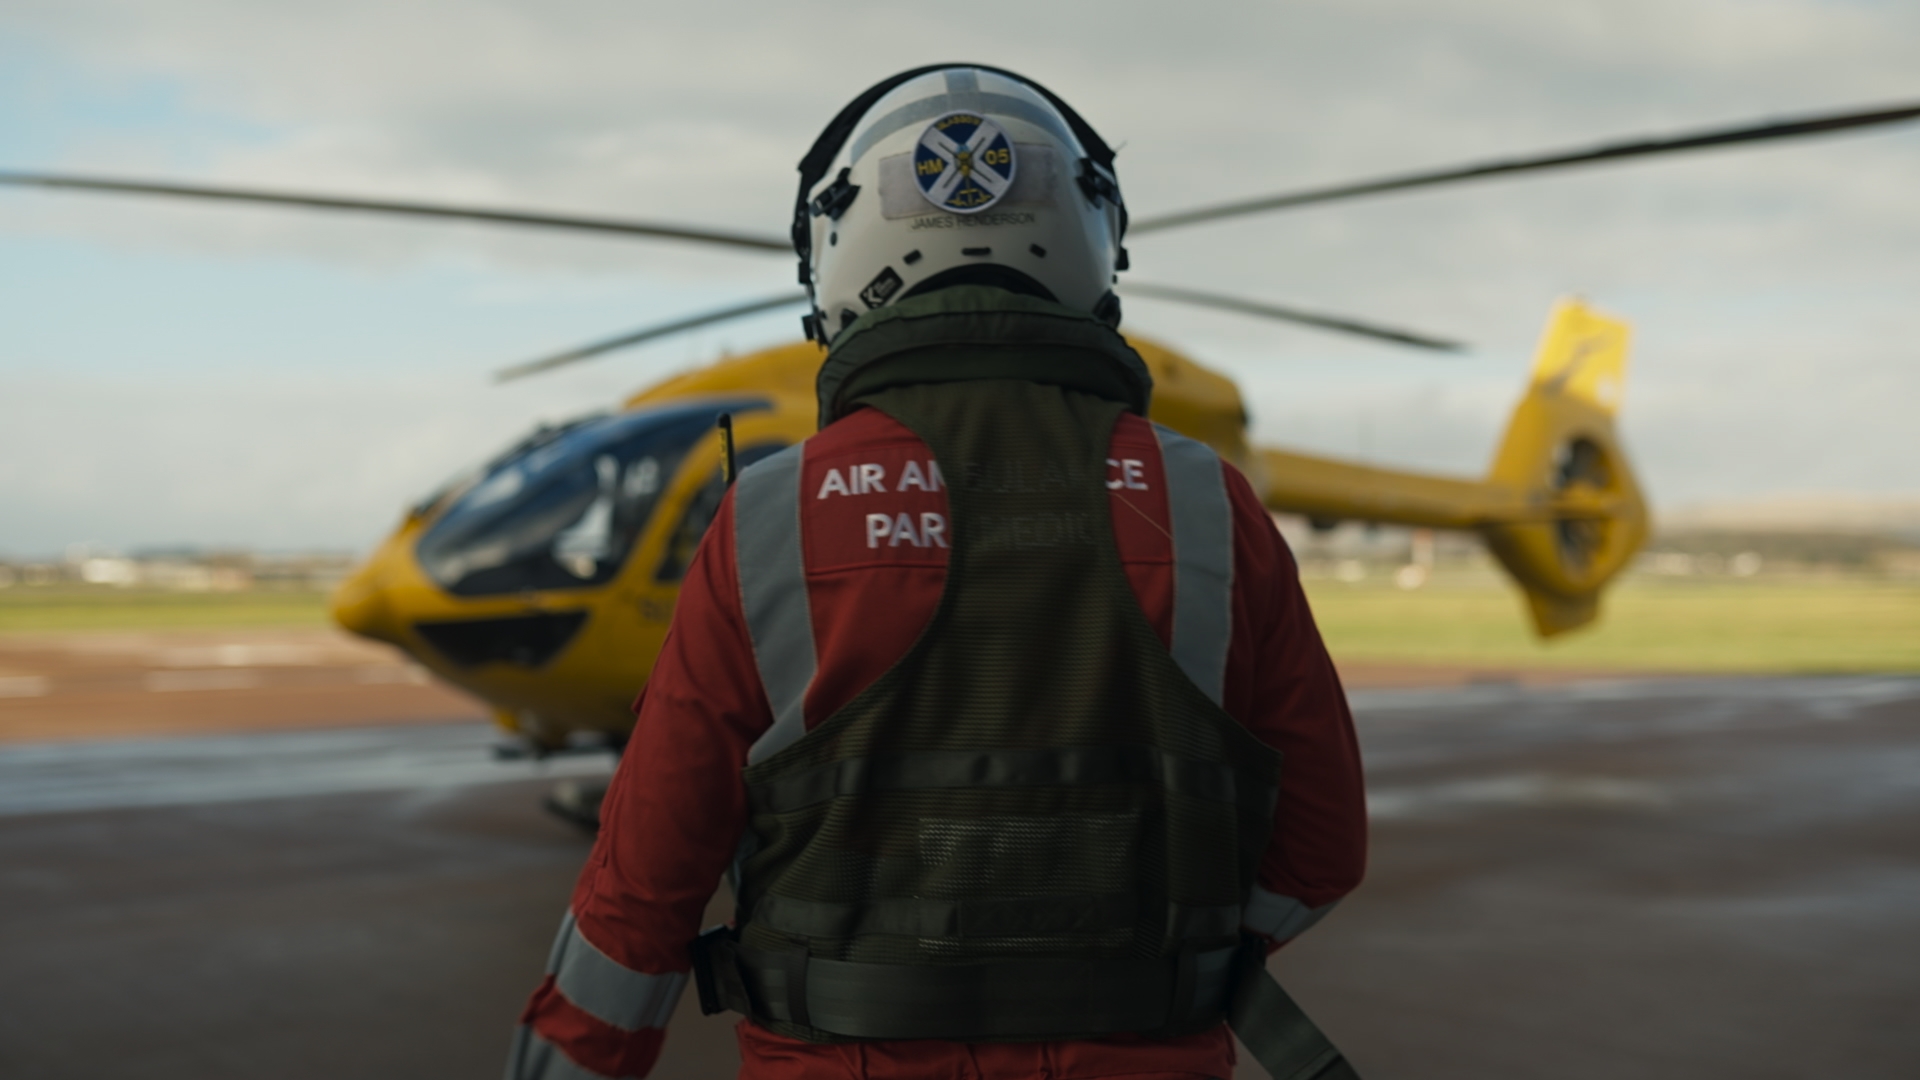 Man in ambulance uniform and helmet walking towards a helicopter